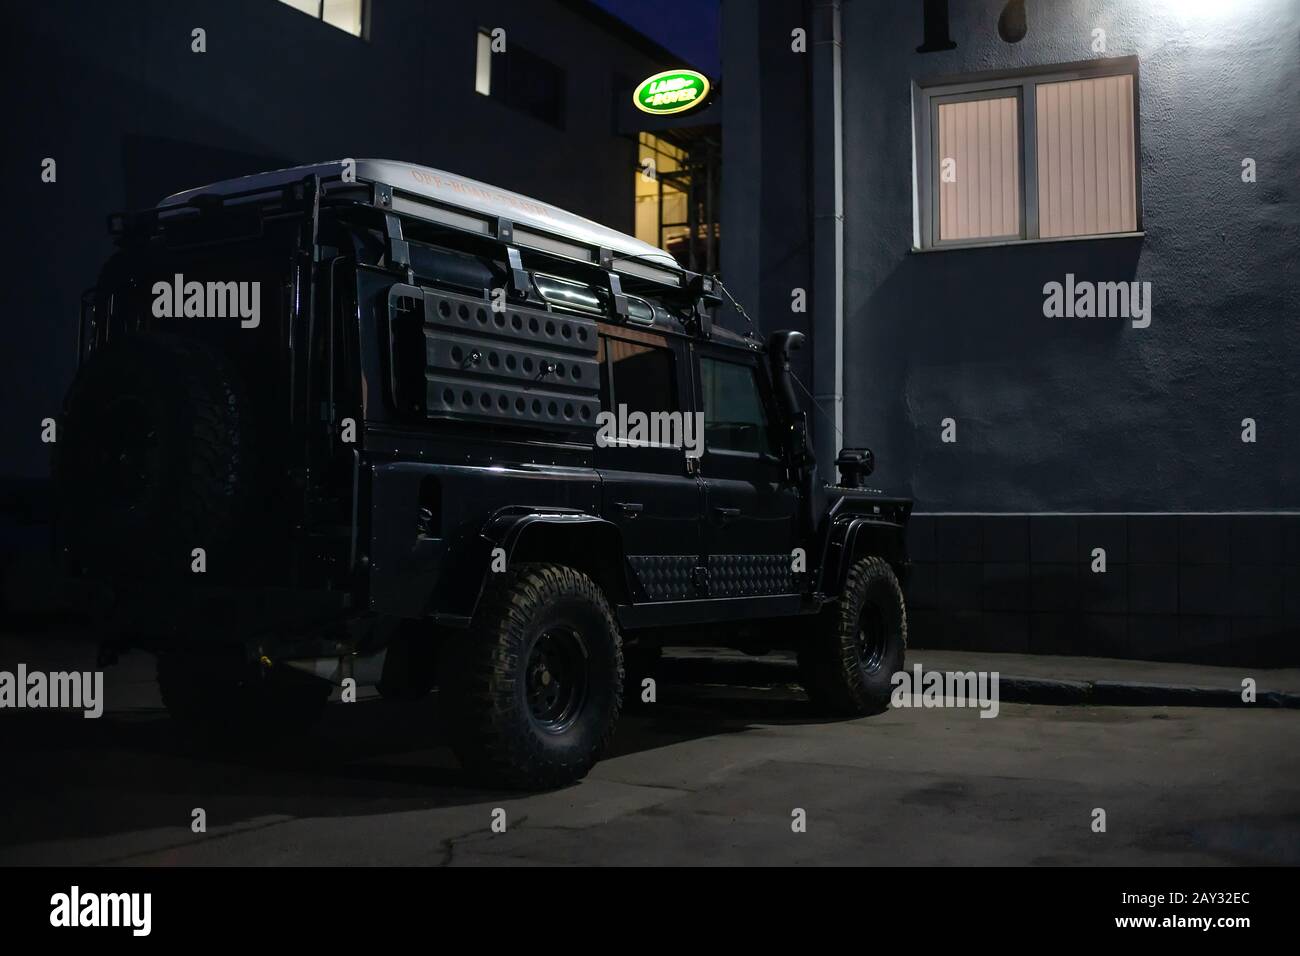 Moscow, Russia - November 20, 2019: Offroad monster Land Rover Defender 110 at night Stock Photo